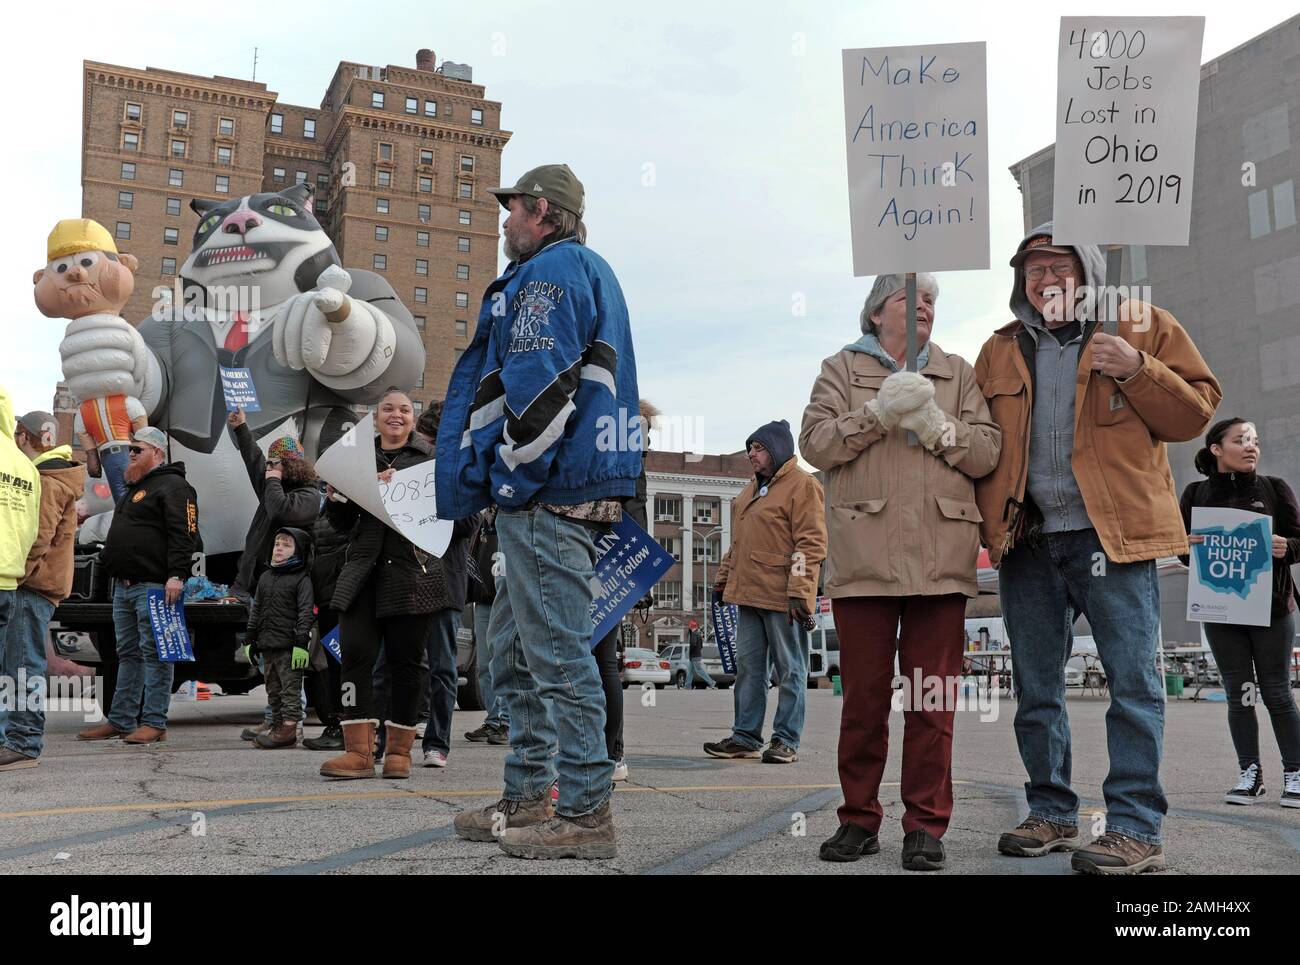 2019 job losses in Ohio on a sign is one area of protest by residents greeting President Trump during his January 9, 2020 campaign stop in Toledo, Ohio, USA. Well outnumbered by Trump supporters attending the nearby 2020 Trump Reelection Rally, protesters still made their voices heard throughout the downtown area near the convention center where Trump and Pence were holding their rally. Stock Photo